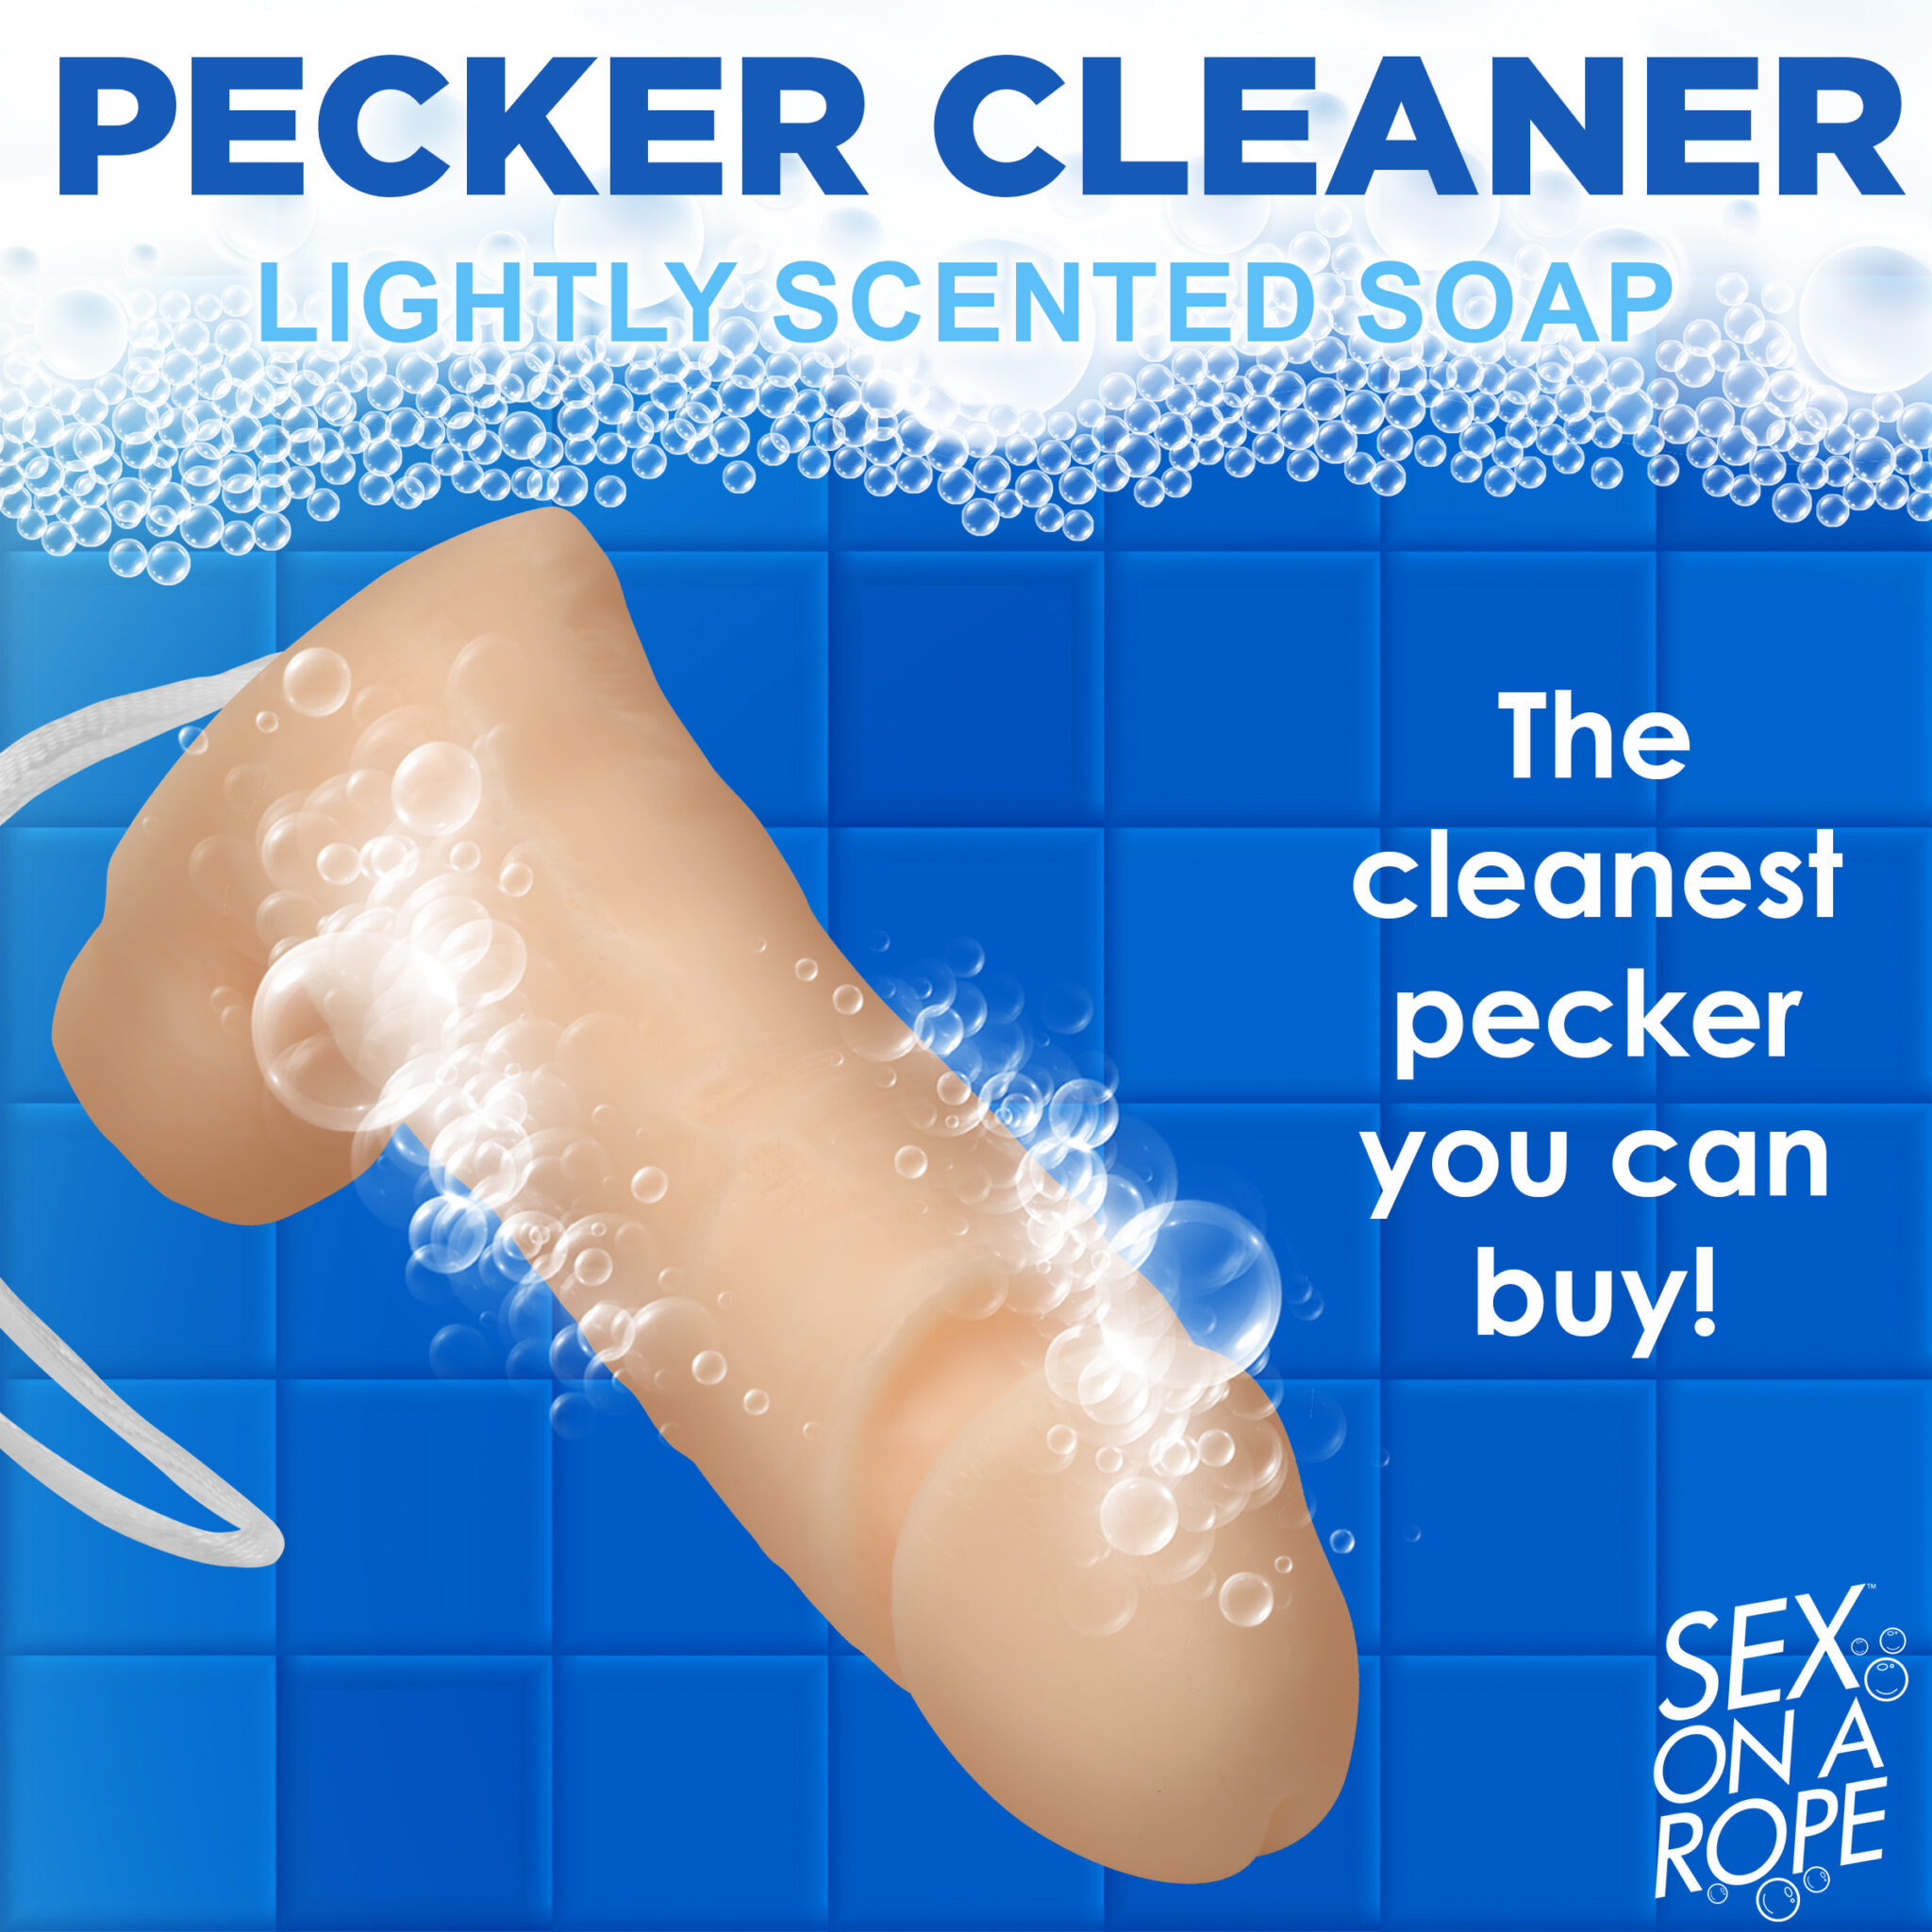 Pecker Cleaner Soap On A Rope